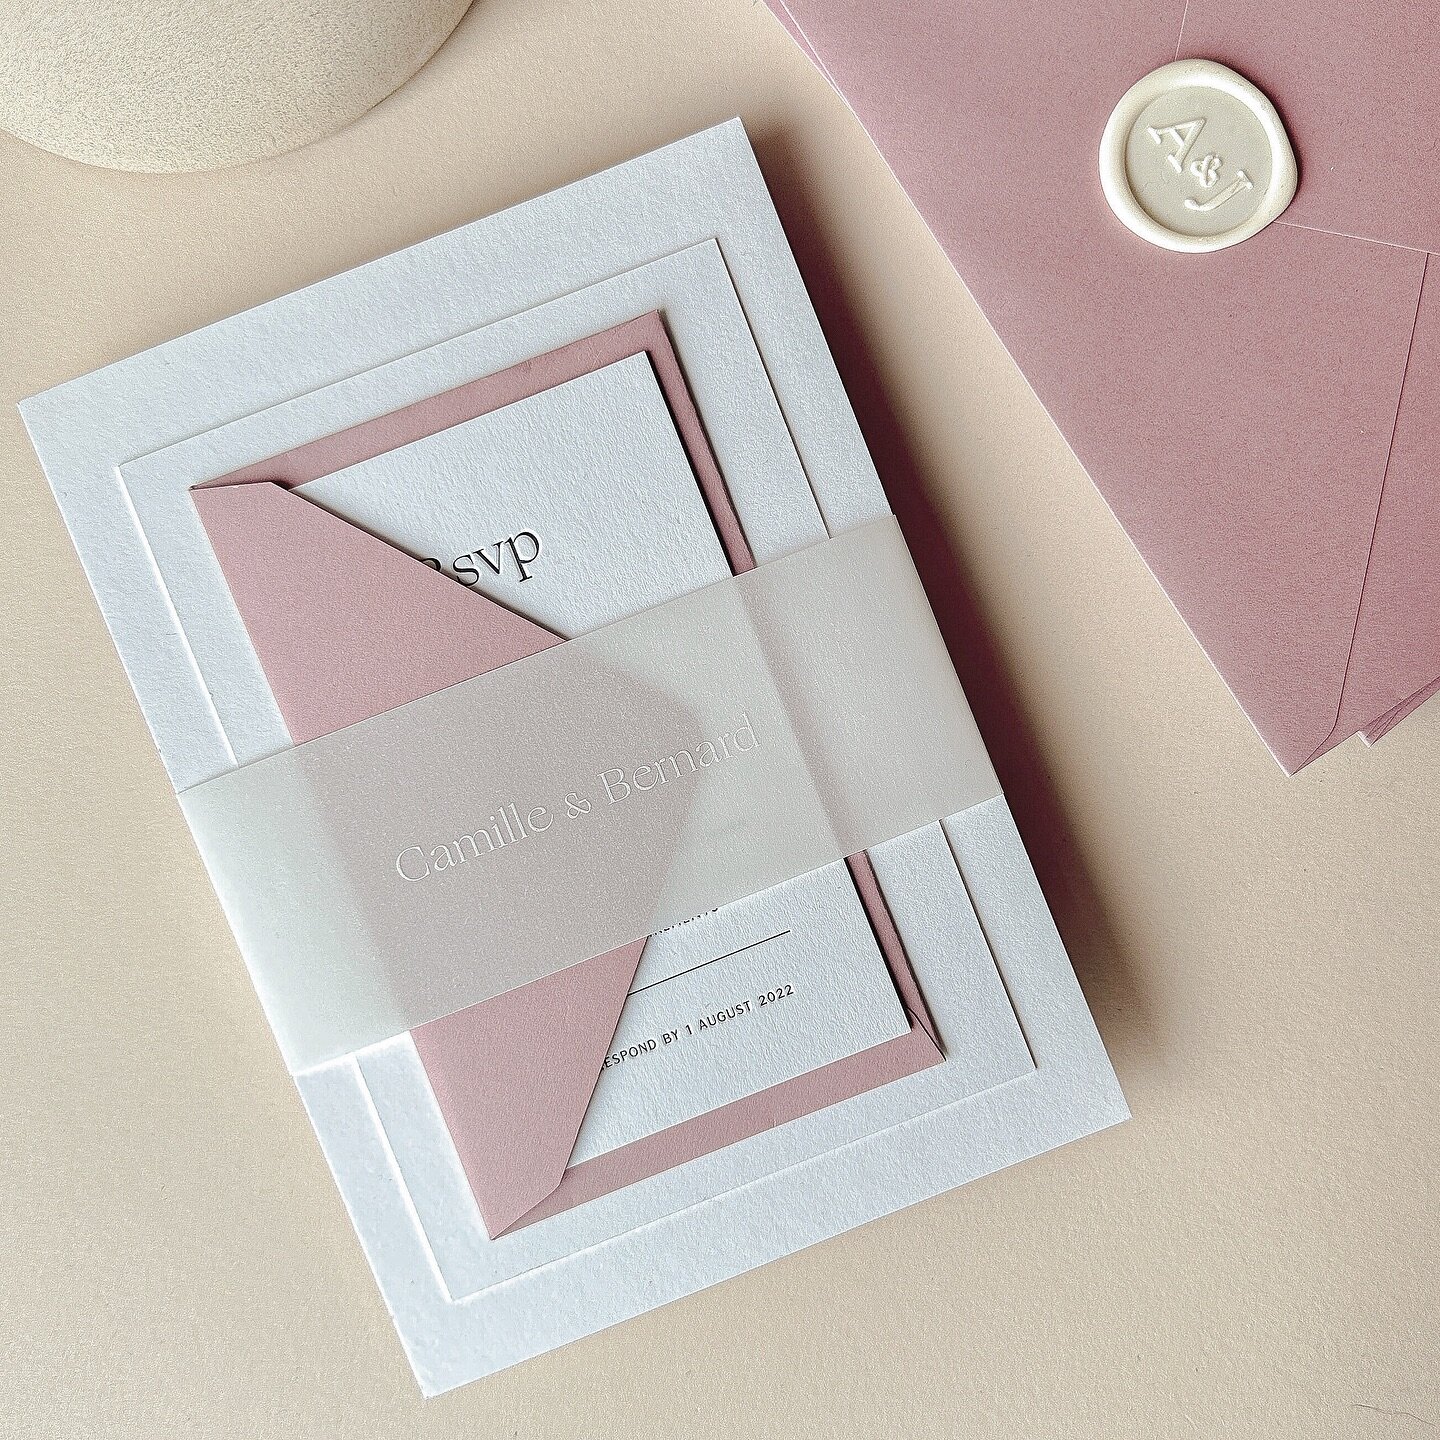 These wedding invitations are an old favourite ✨ A&amp;J chose an all white suite and added a hint of colour with their envelopes 💭 Featured here - The Anine Collection with Chalk Invites, Old Rose Envelopes and a Buttermilk Wax Seal 🤍